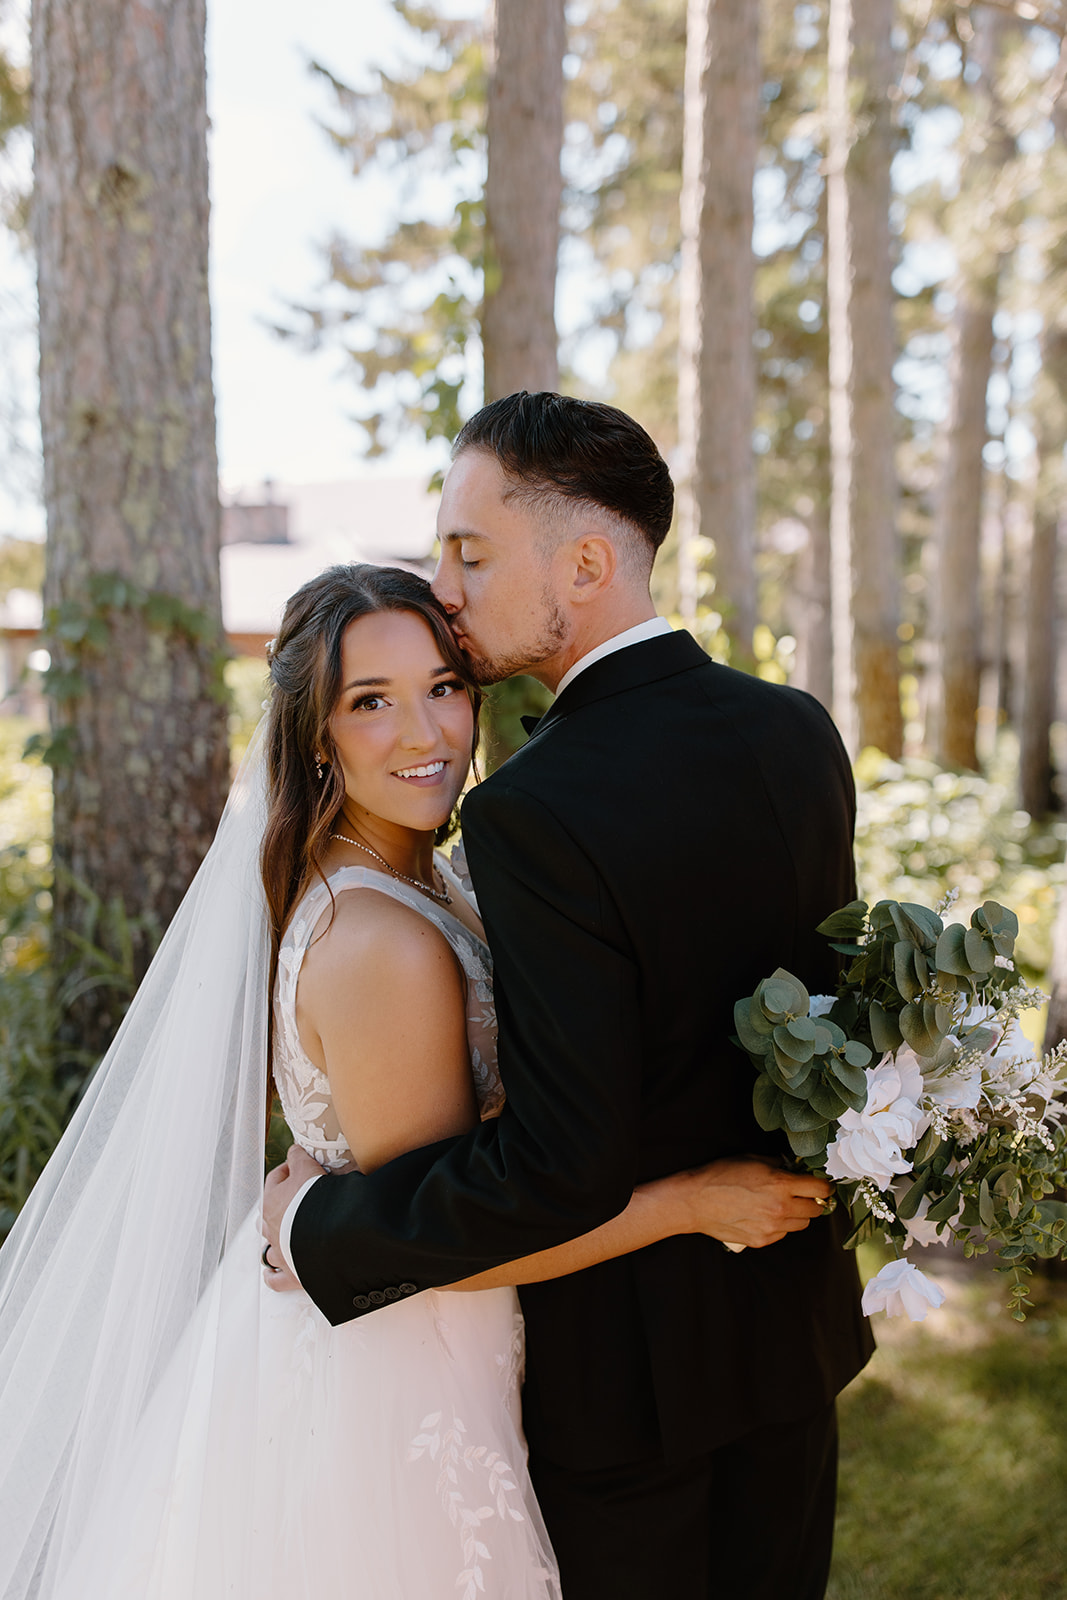 Groom kisses his bride in front of a line of trees